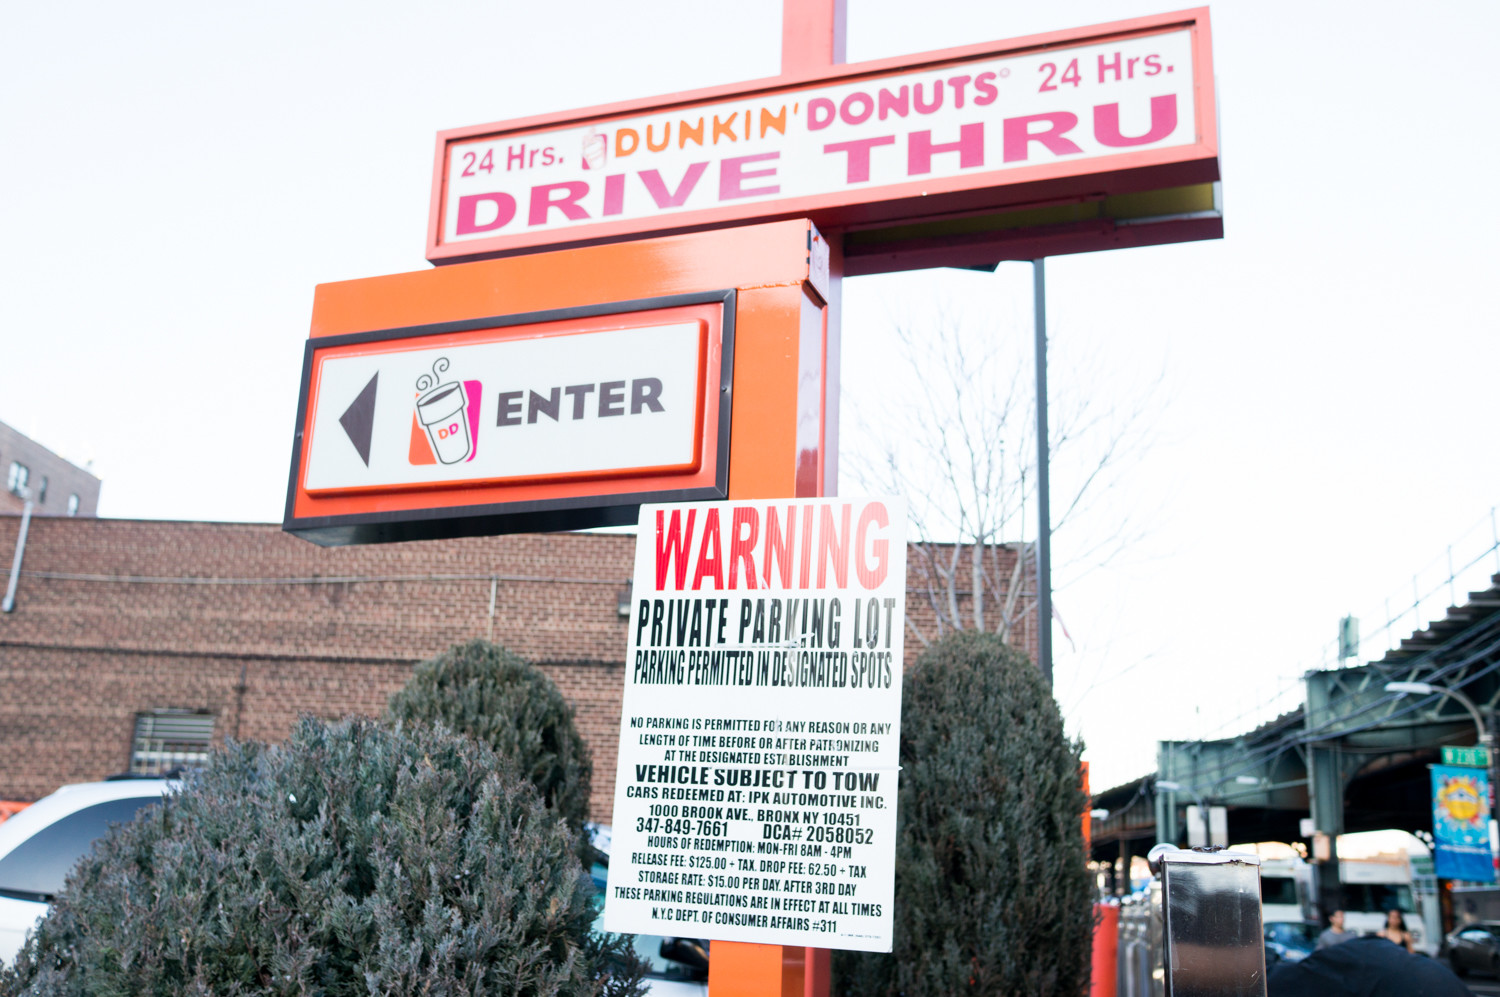 A sign posted at the entrance to the Dunkin’ Donuts parking lot at West 230th Street and Broadway informs drivers their cars will be towed if they park there and go anywhere other than Dunkin’.